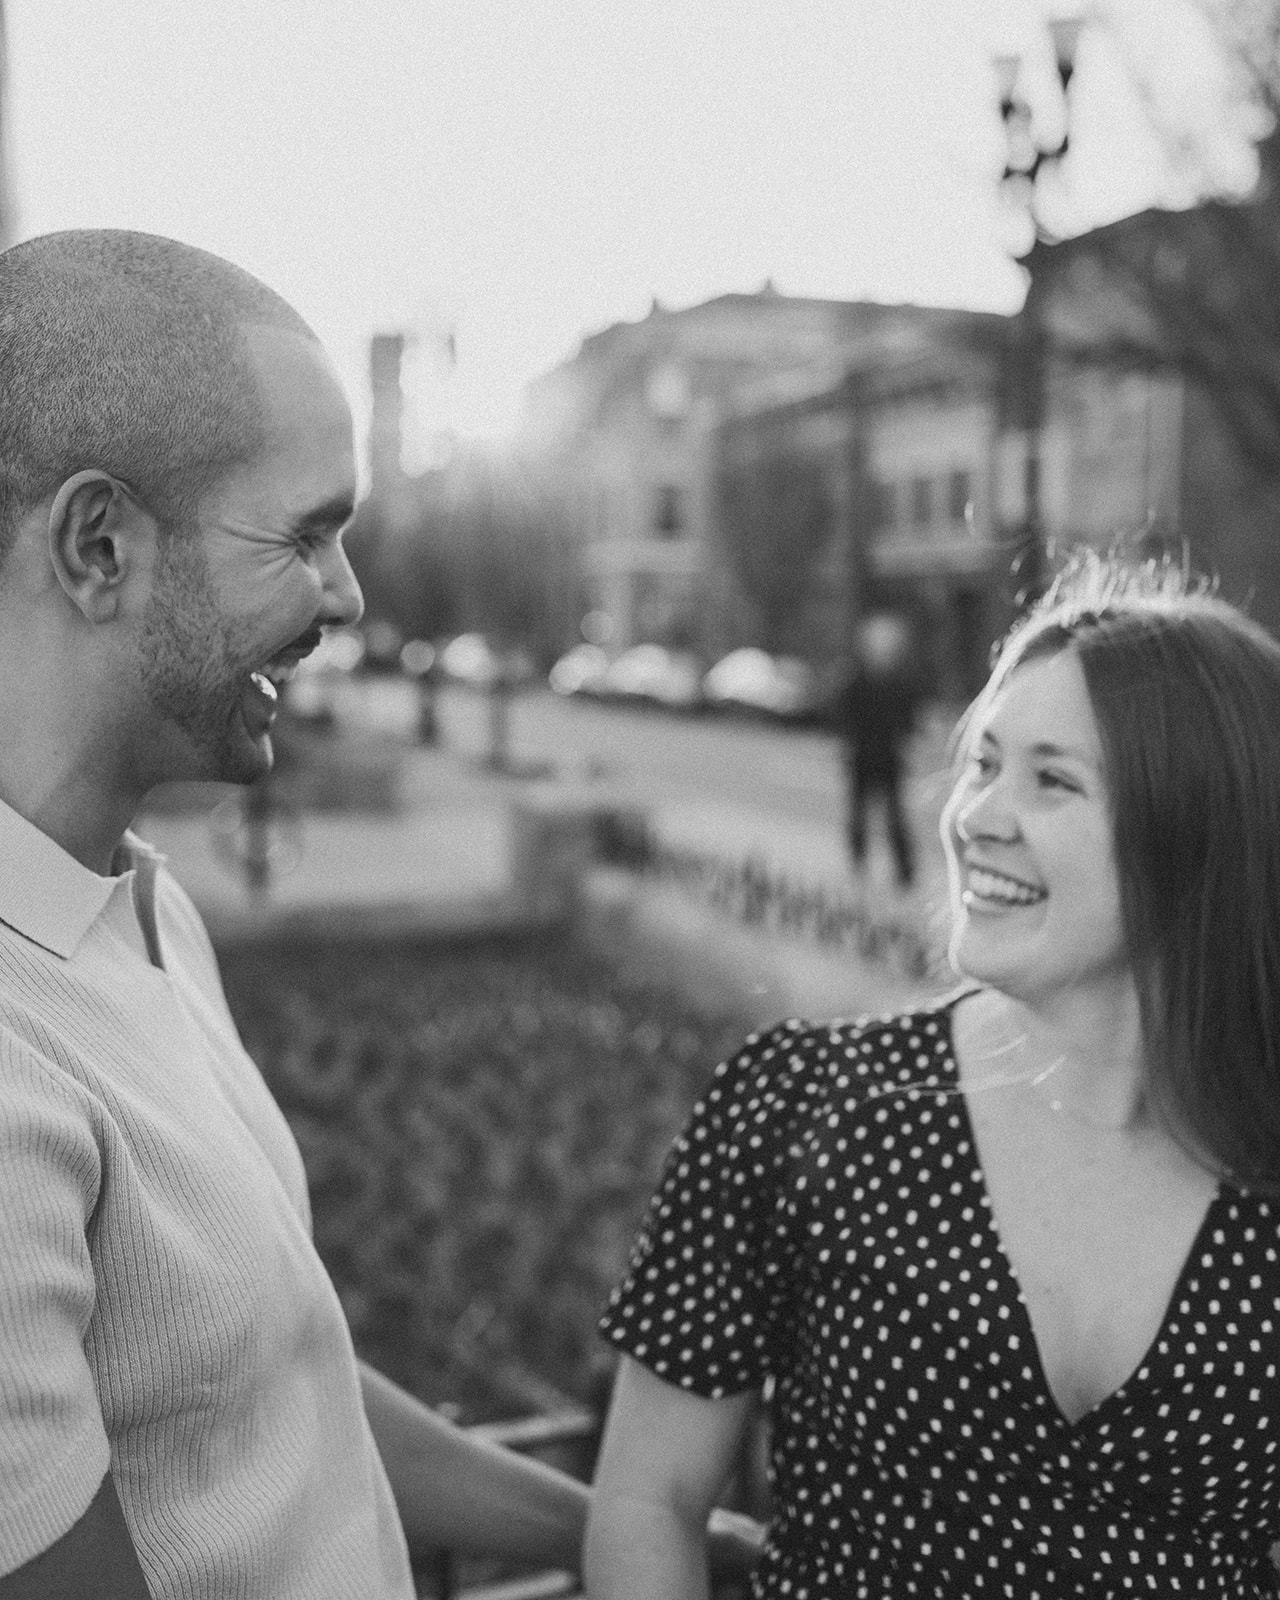 A candid moment caught in black and white of a couple laughing together